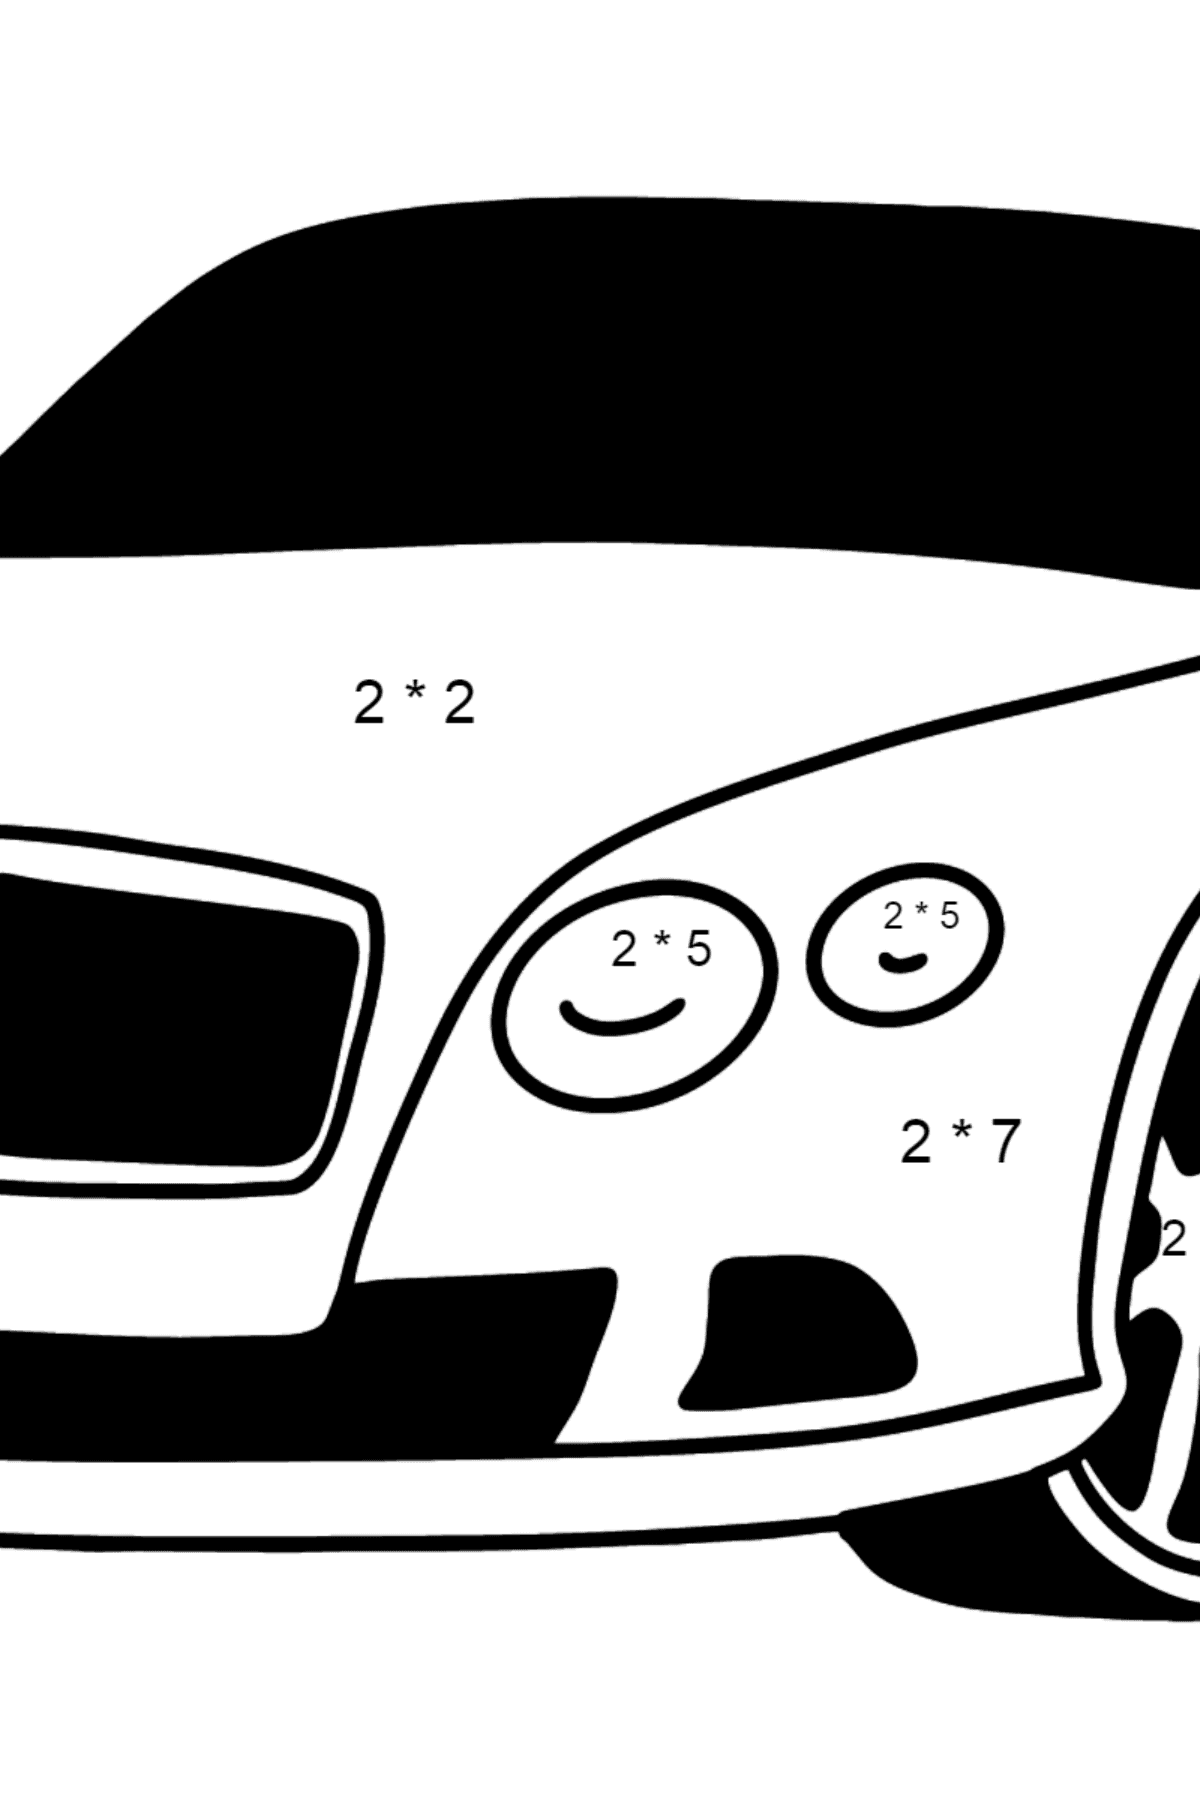 Bentley Continental GT Car coloring page - Math Coloring - Multiplication for Kids